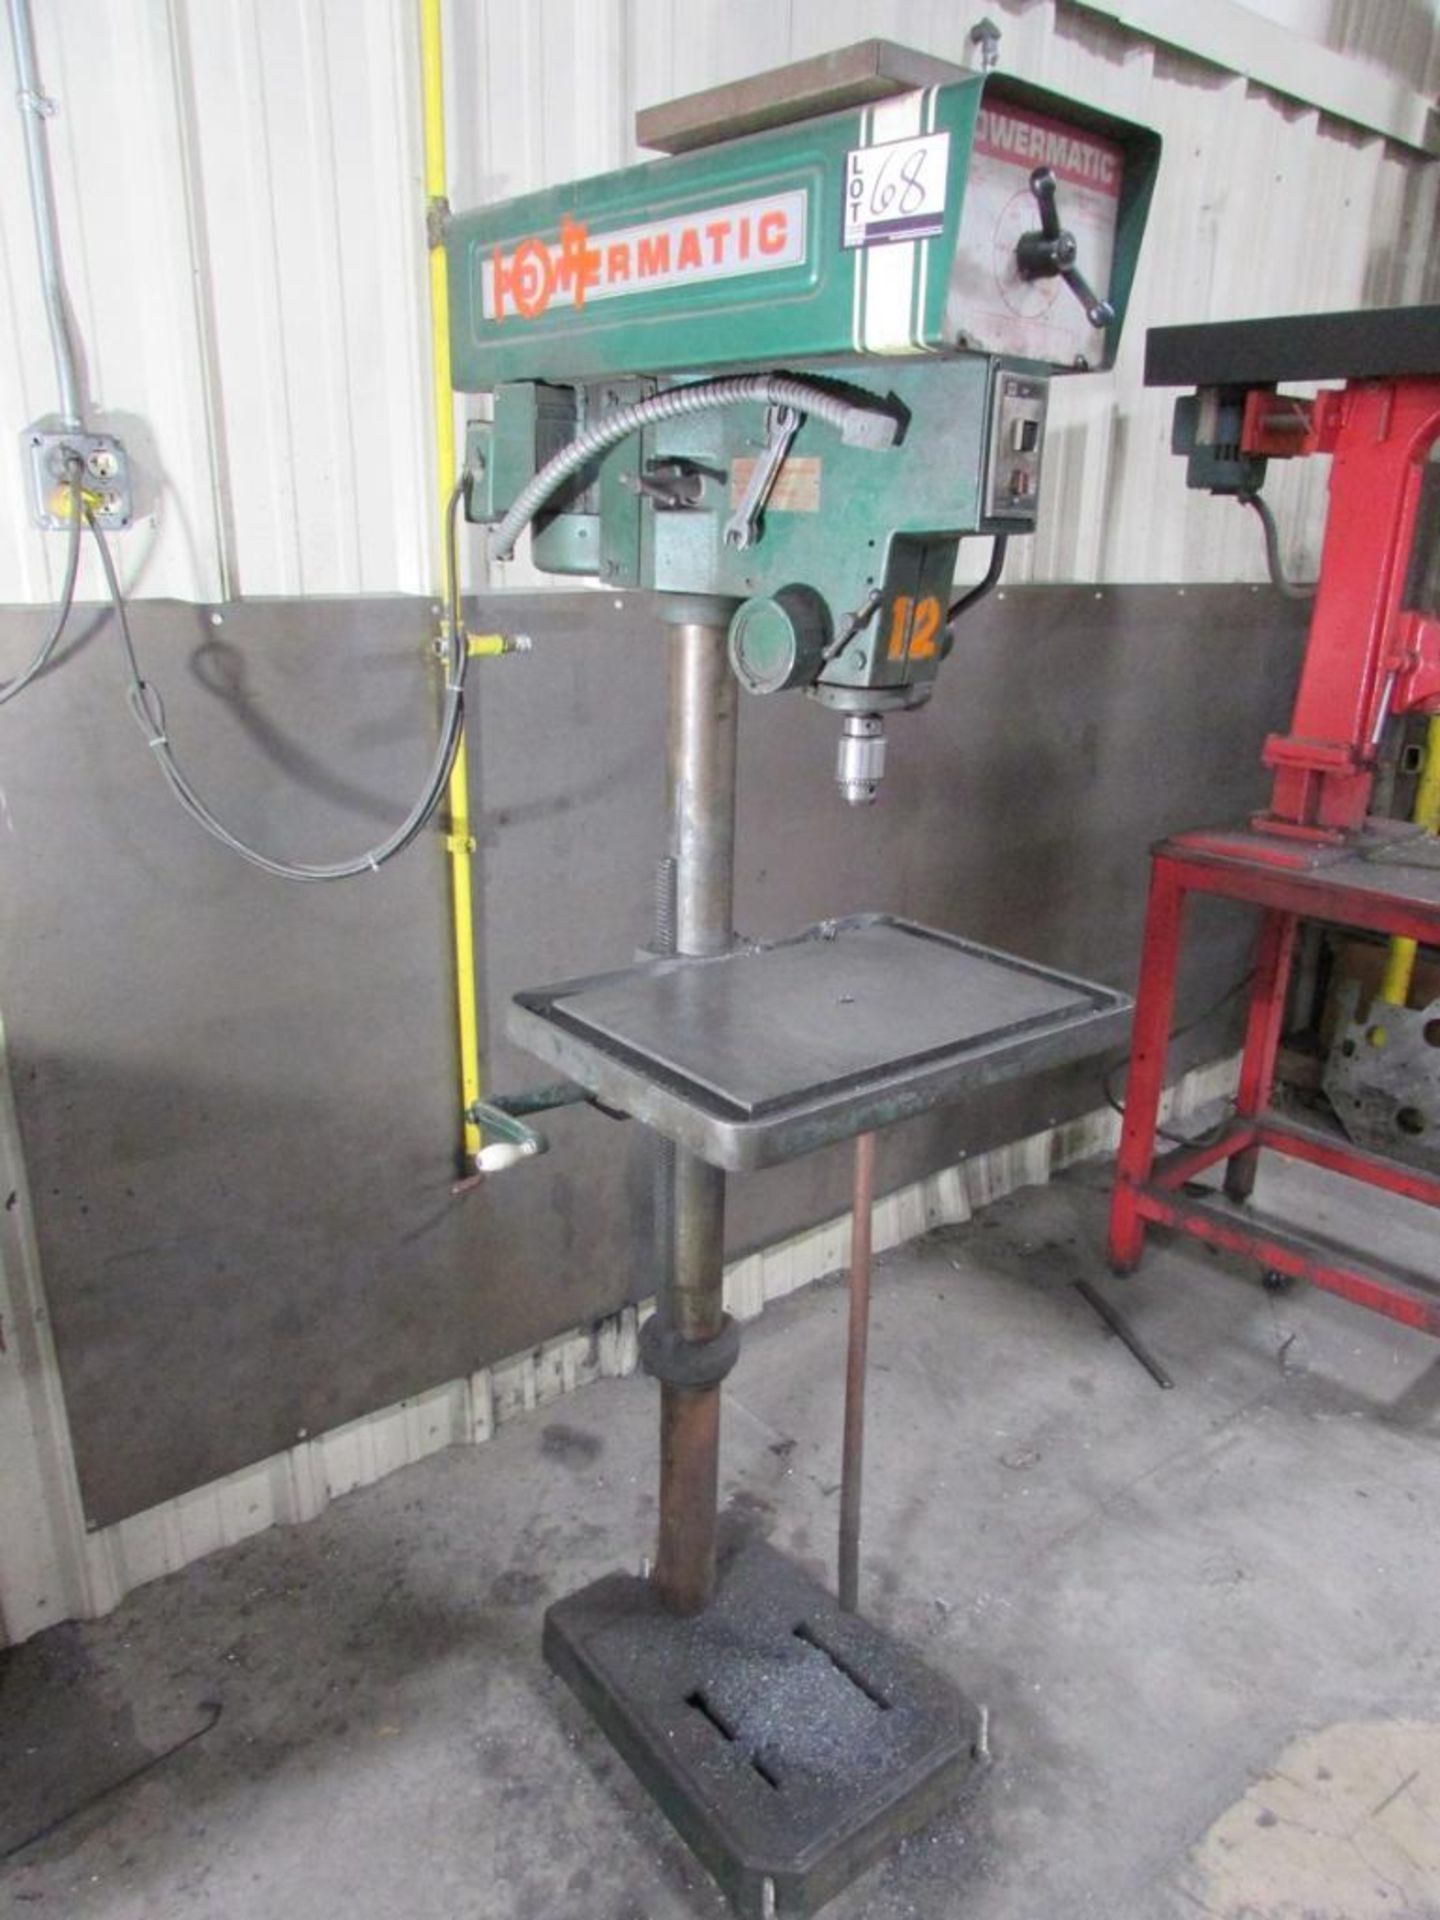 Powermatic Houdaille 1150A 15" Floor Standing Drill Press, 18"x12" Table, 1/2" Jacobs Chuck, 6" Stro